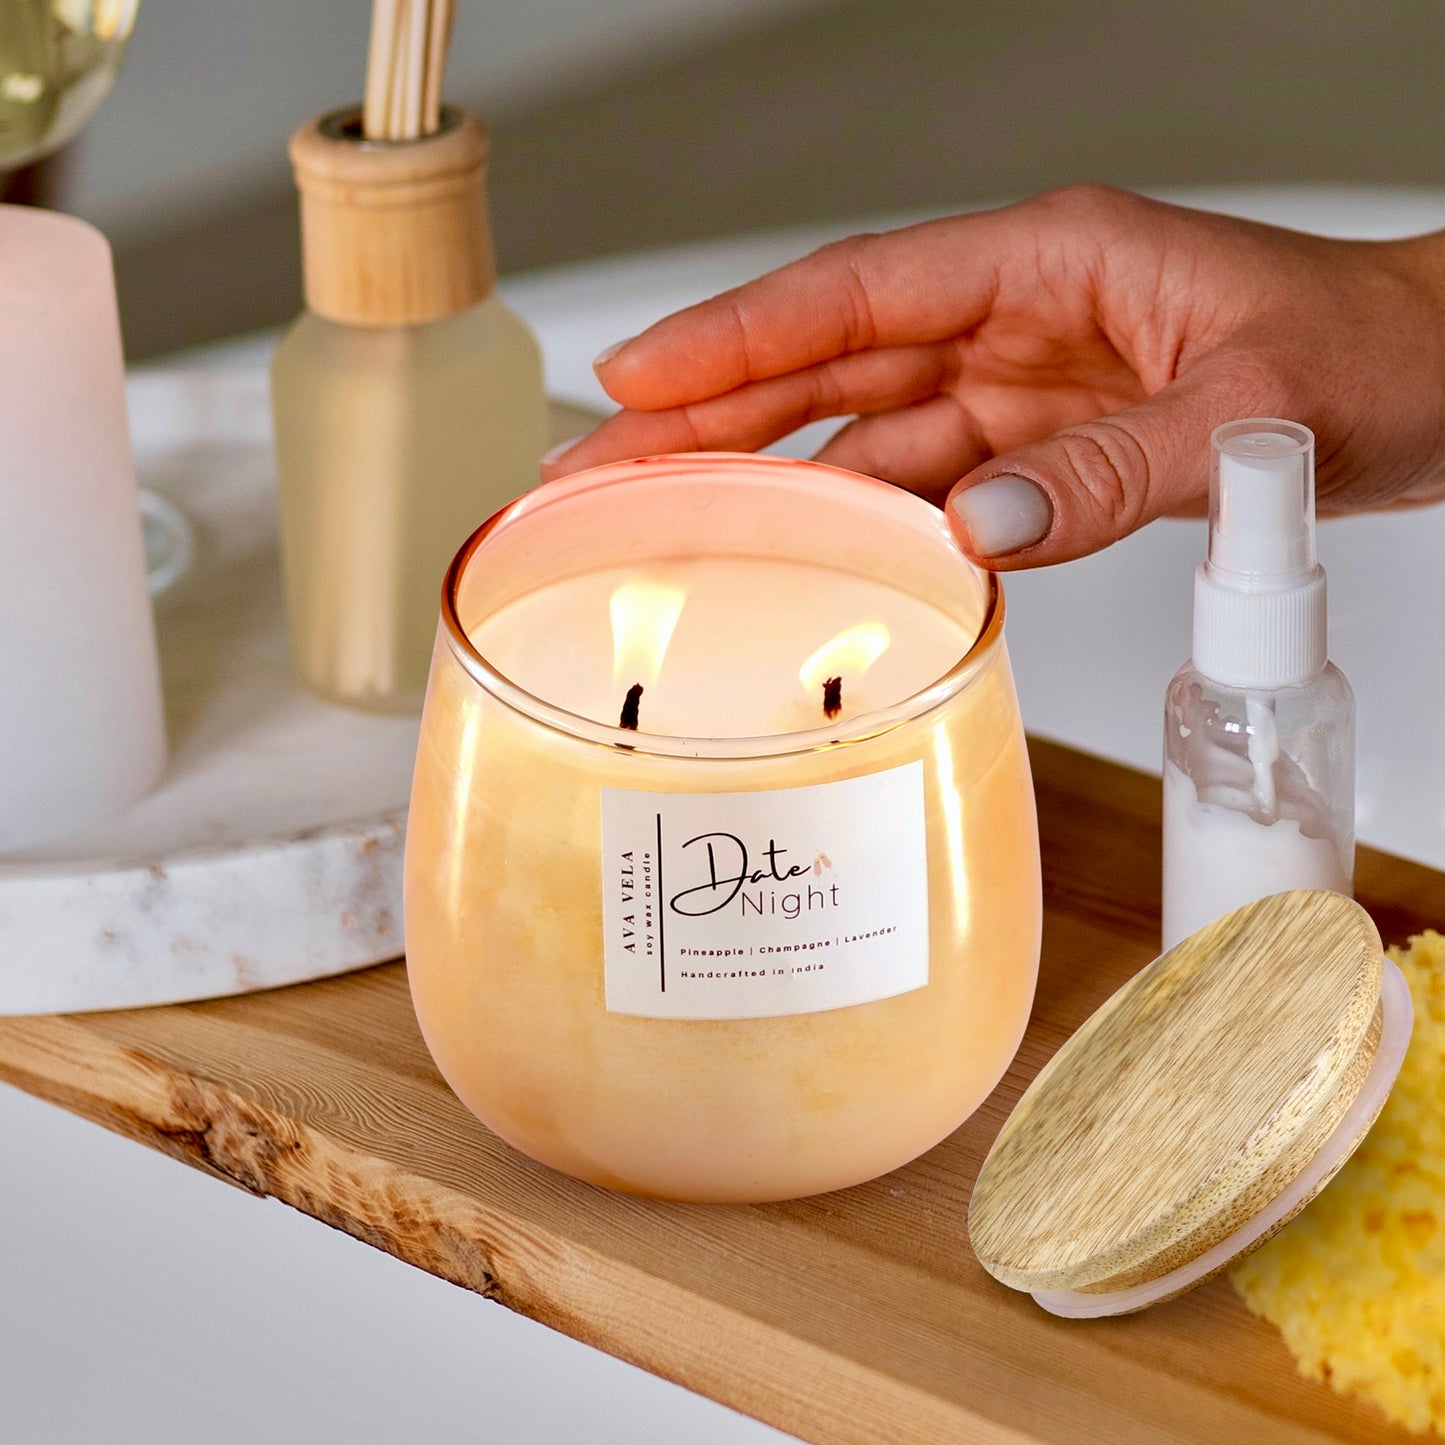 Date Night (Champagne + Lavender + Pineapple) Soy Wax Scented Candle 48 Hours Burn Time